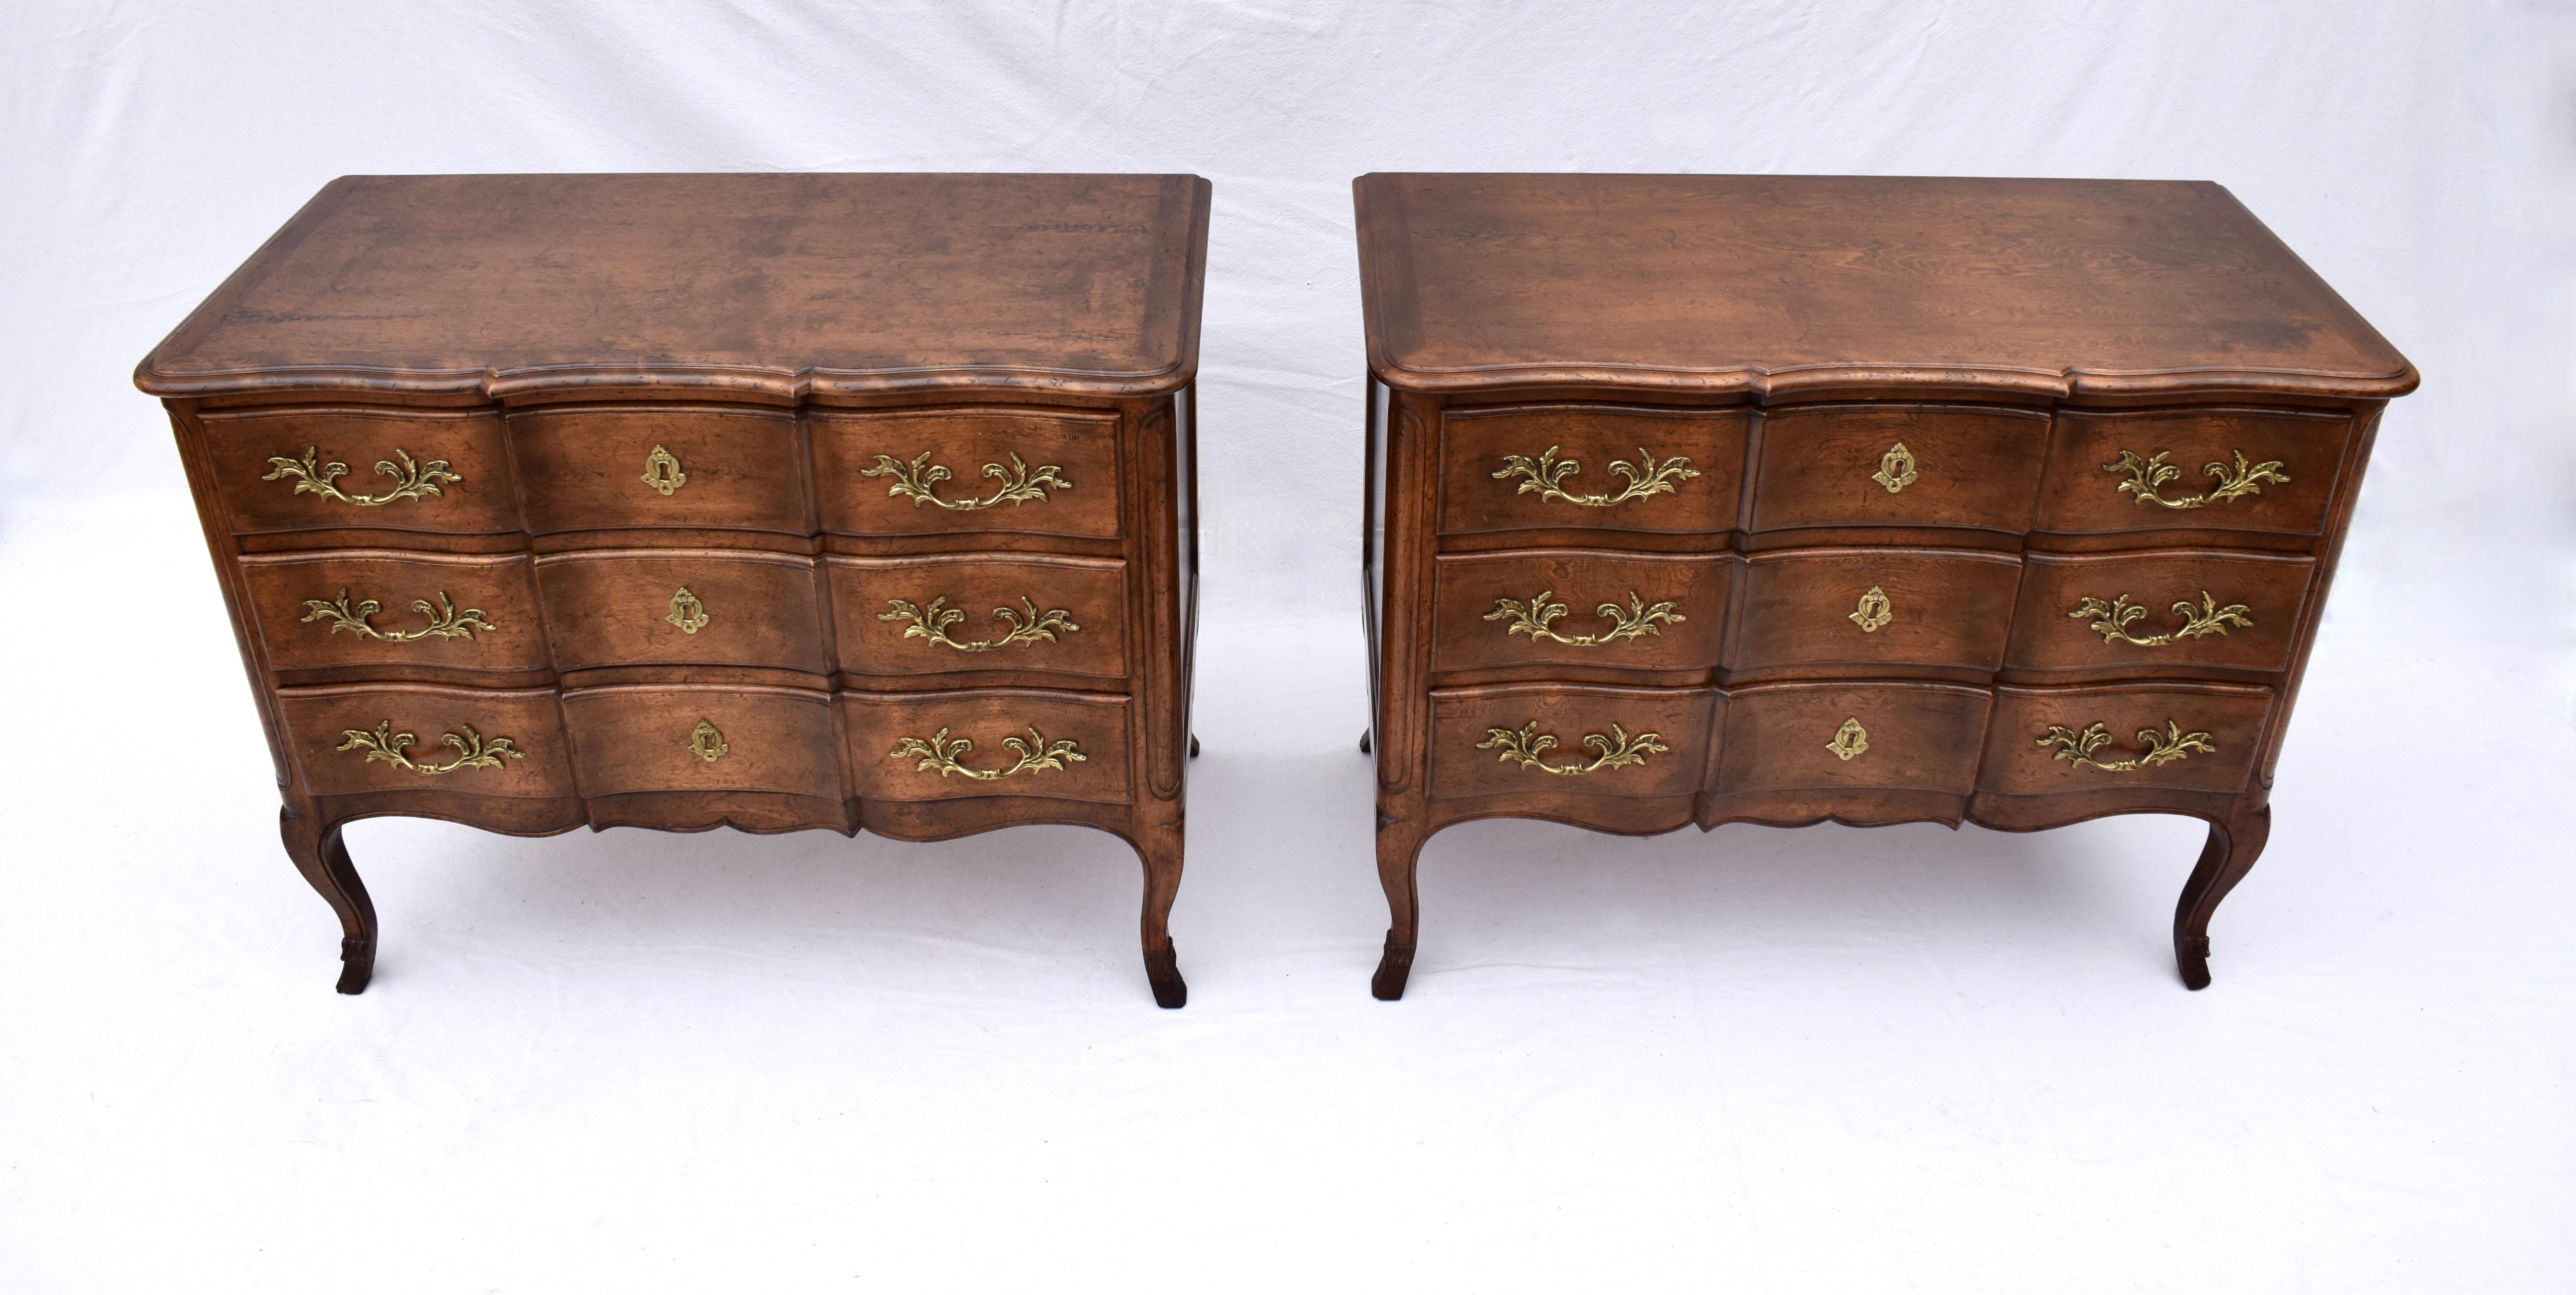 French Country style matching commodes with serpentine block fronts and conforming tops, surmounting three generous size drawers and original hardware. Splayed legs are finished with marvelous hooves feet typically seen in period examples of French